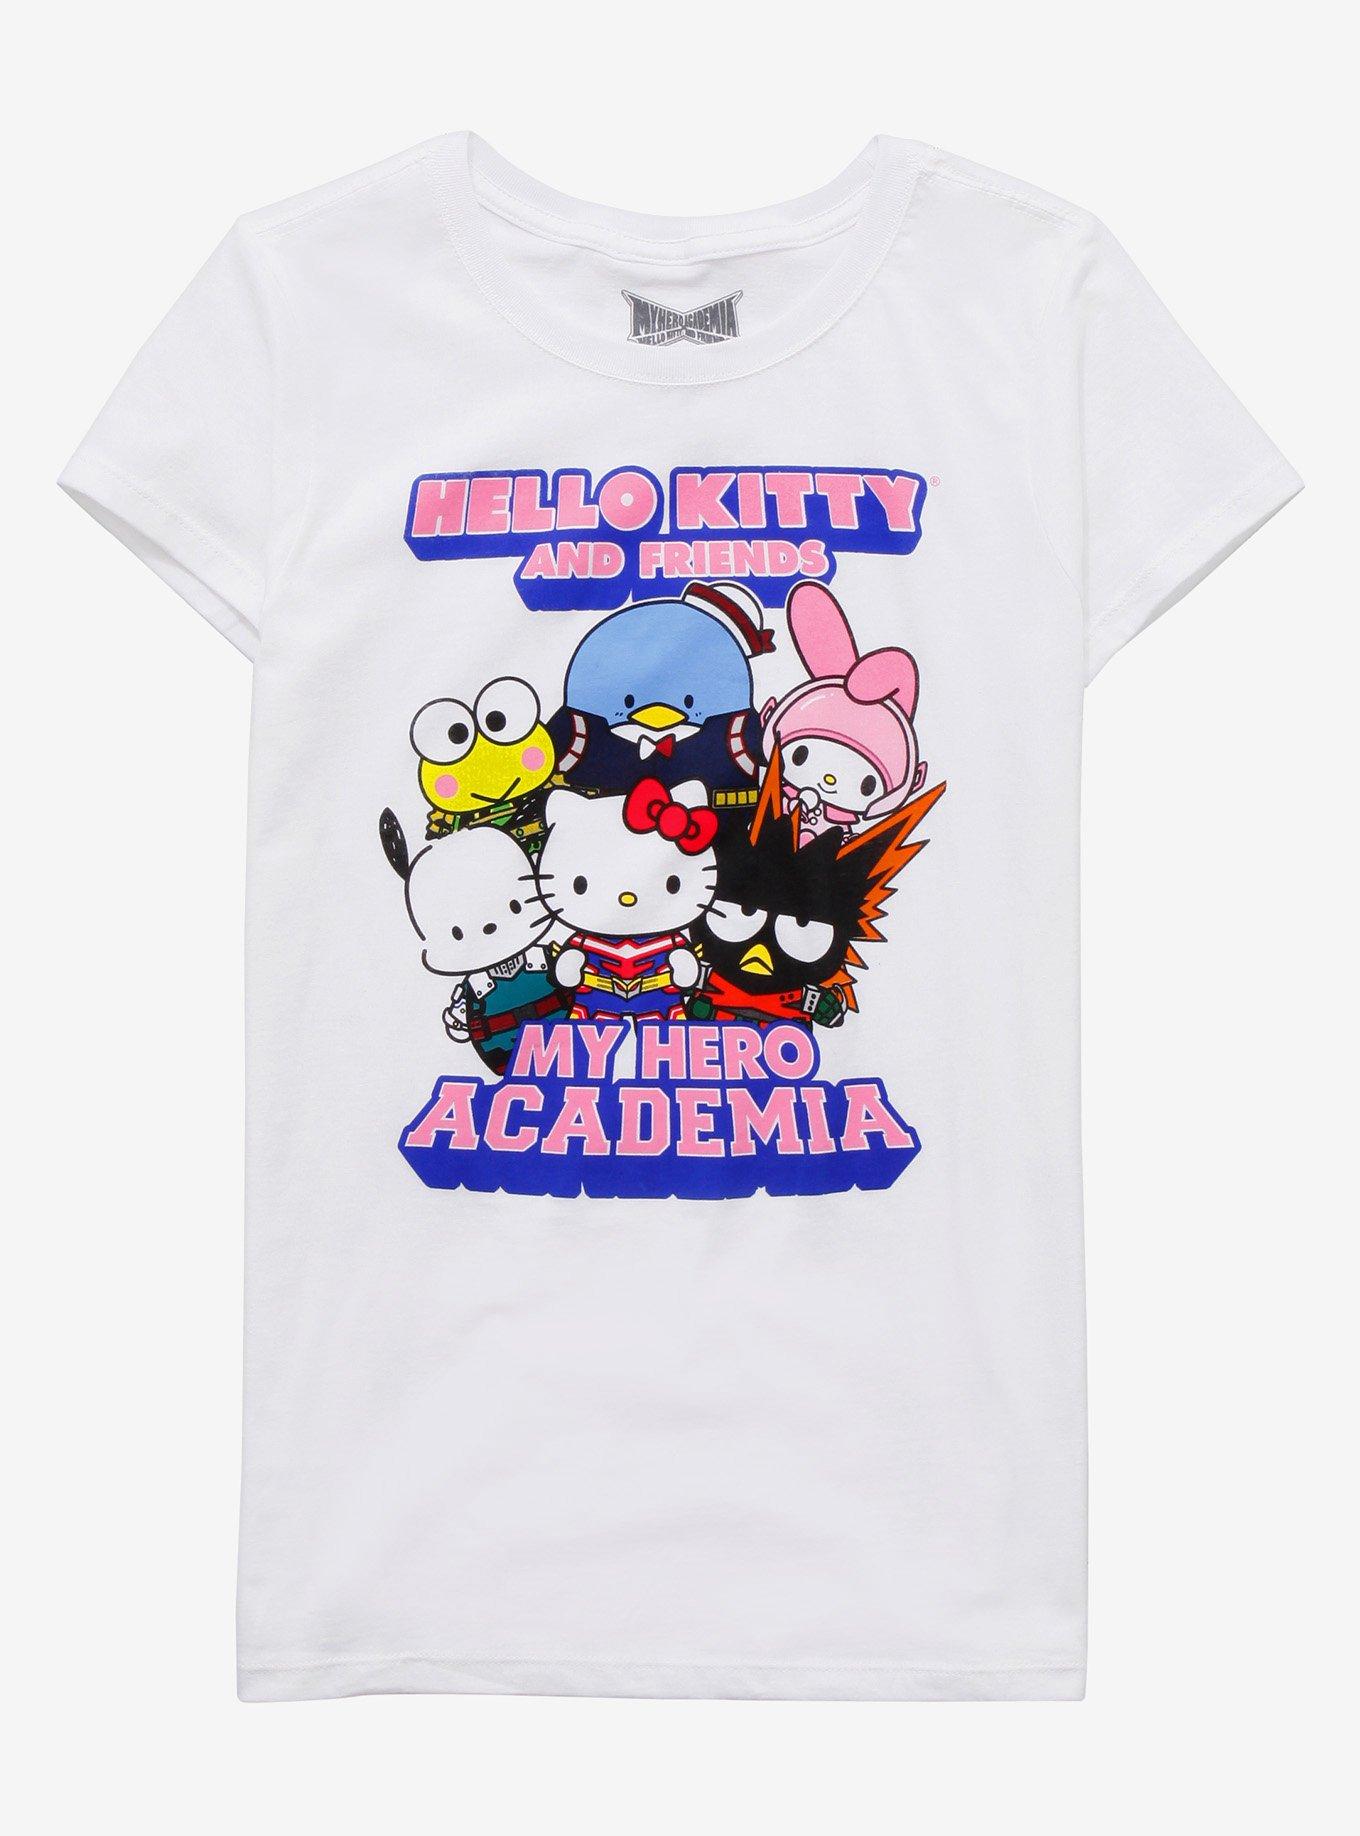 My Hero Academia X Hello Kitty And Friends Group Girls T-Shirt, MULTI, hi-res